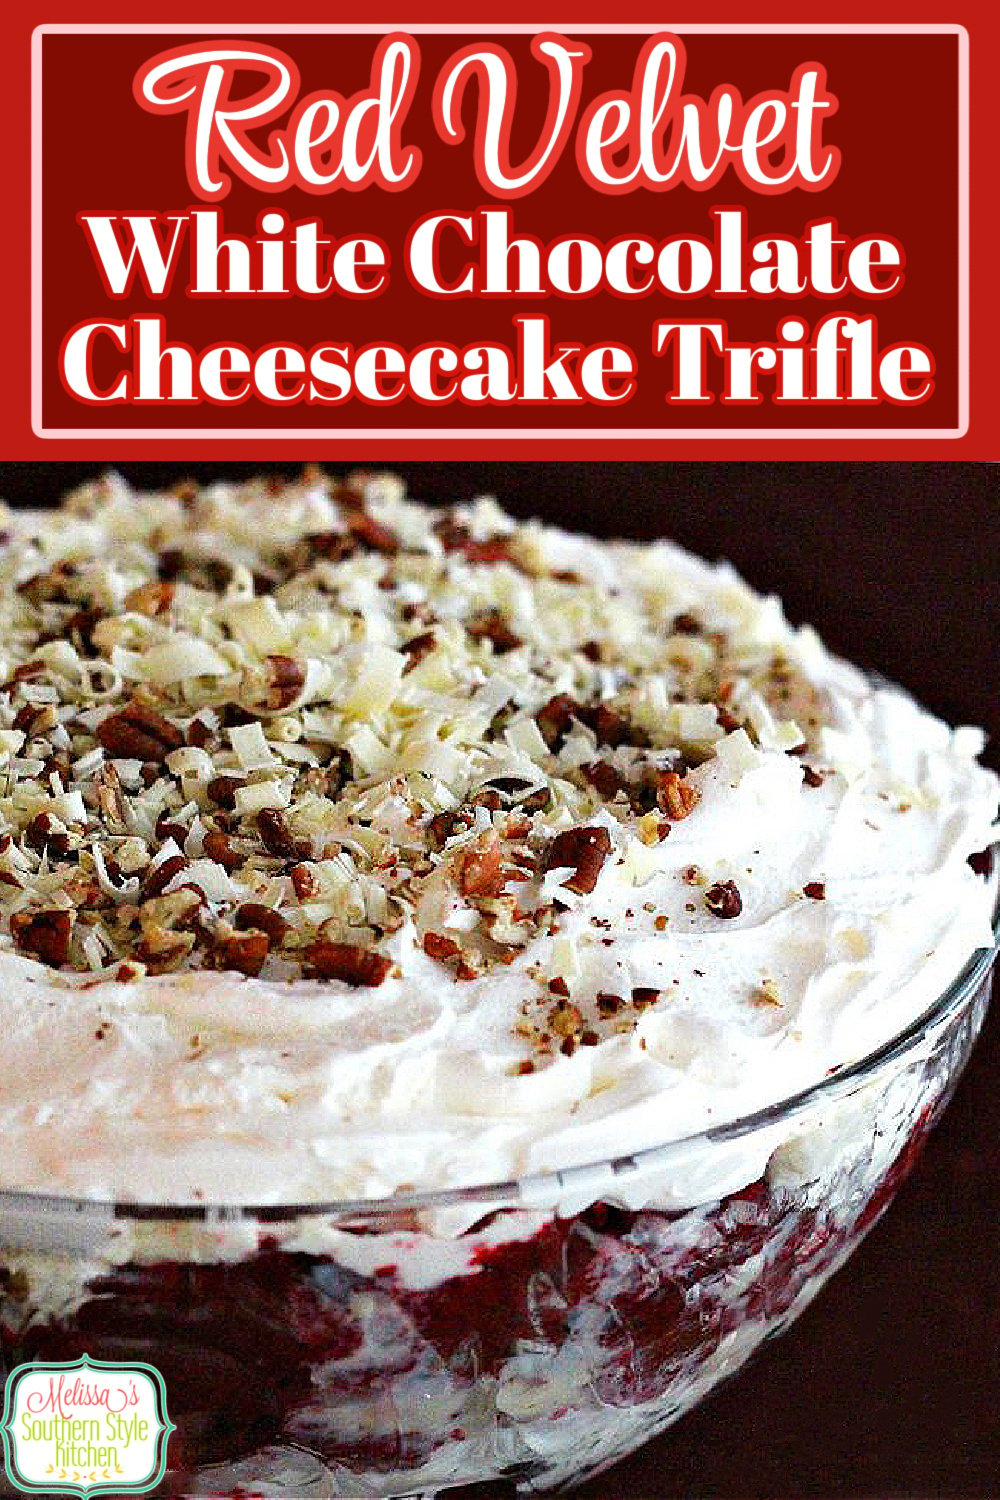 Add this stunning Red Velvet white chocolate cheesecake Trifle to your special occasion and holiday desserts menu #redvelvettrifle #redvelvetdesserts #chocolatetrifles #cheesecake #redvelvetcheesecake #trifles #triflerecipes #chocolatedesserts via @melissasssk